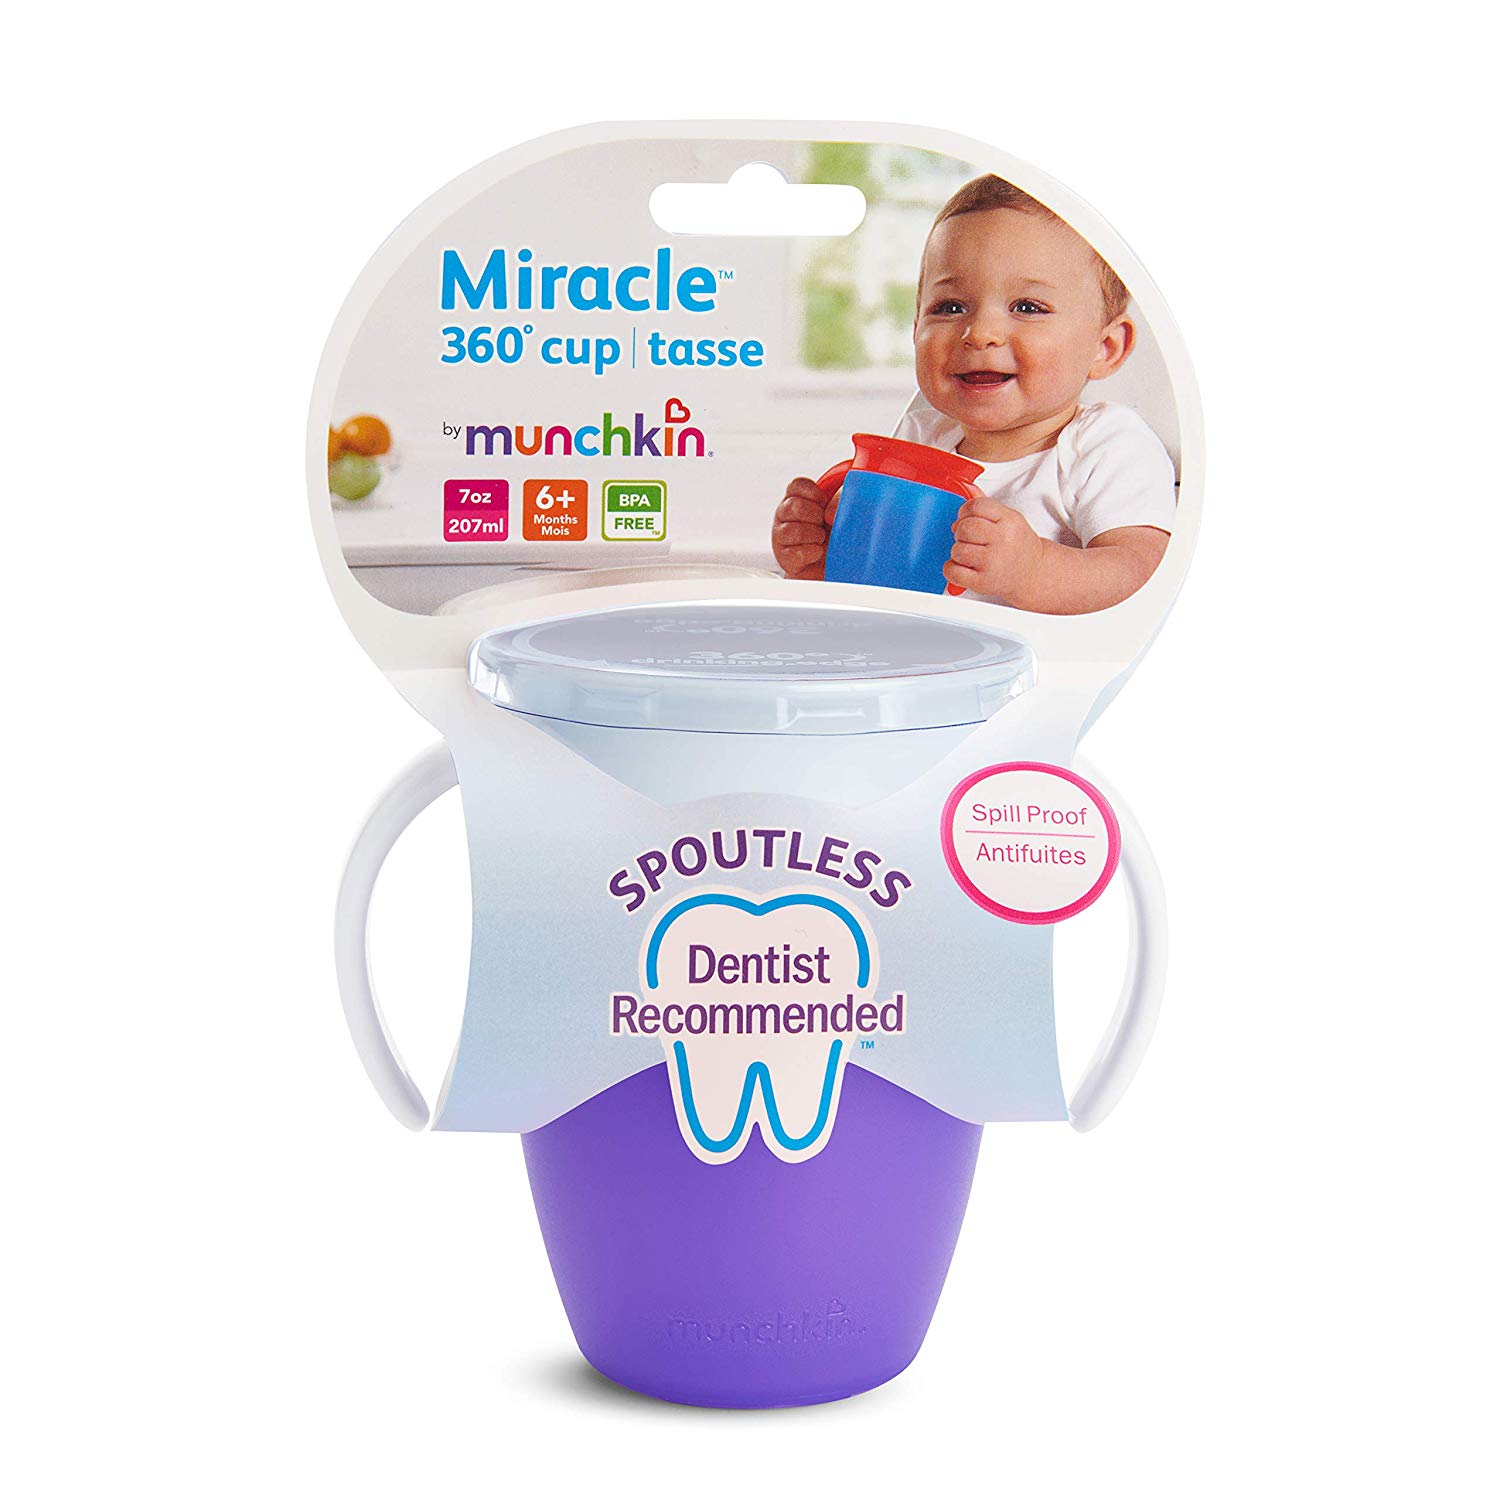 Munchkin Miracle 360 Trainer Cup, Purple, 7 oz - image 2 of 3